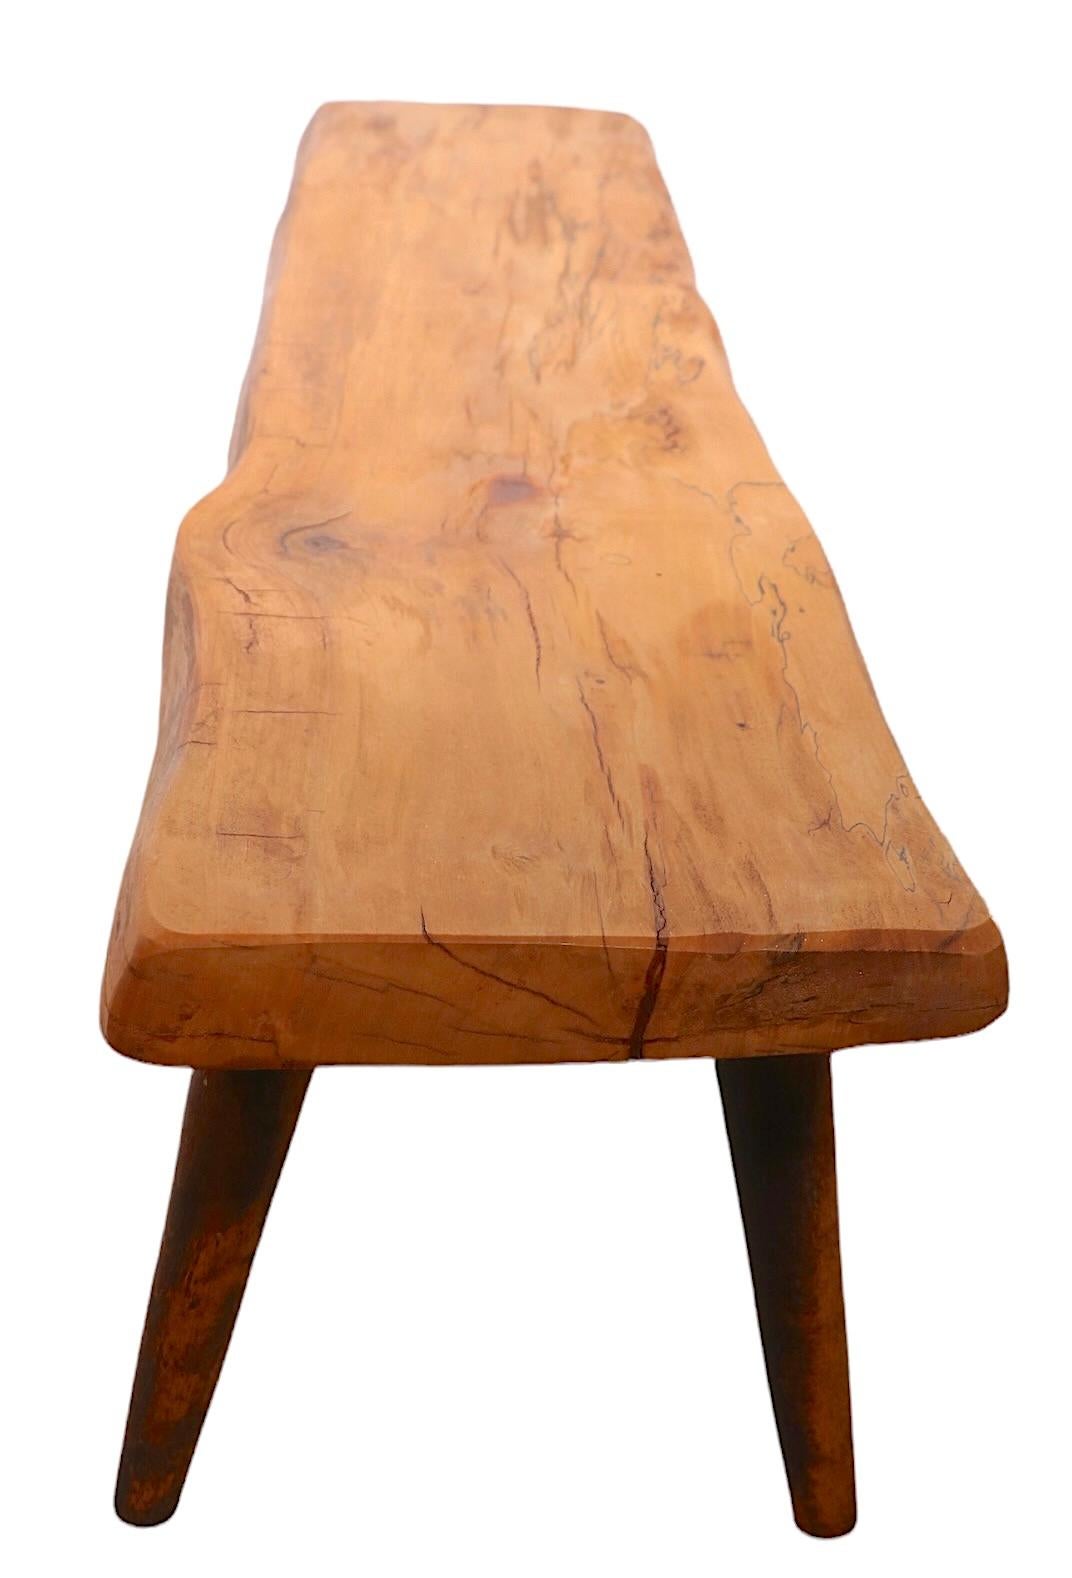 Wood Mid-Century Organic Modern Free Edge Side, End Table by Roy Sheldon Ca. 1970 For Sale